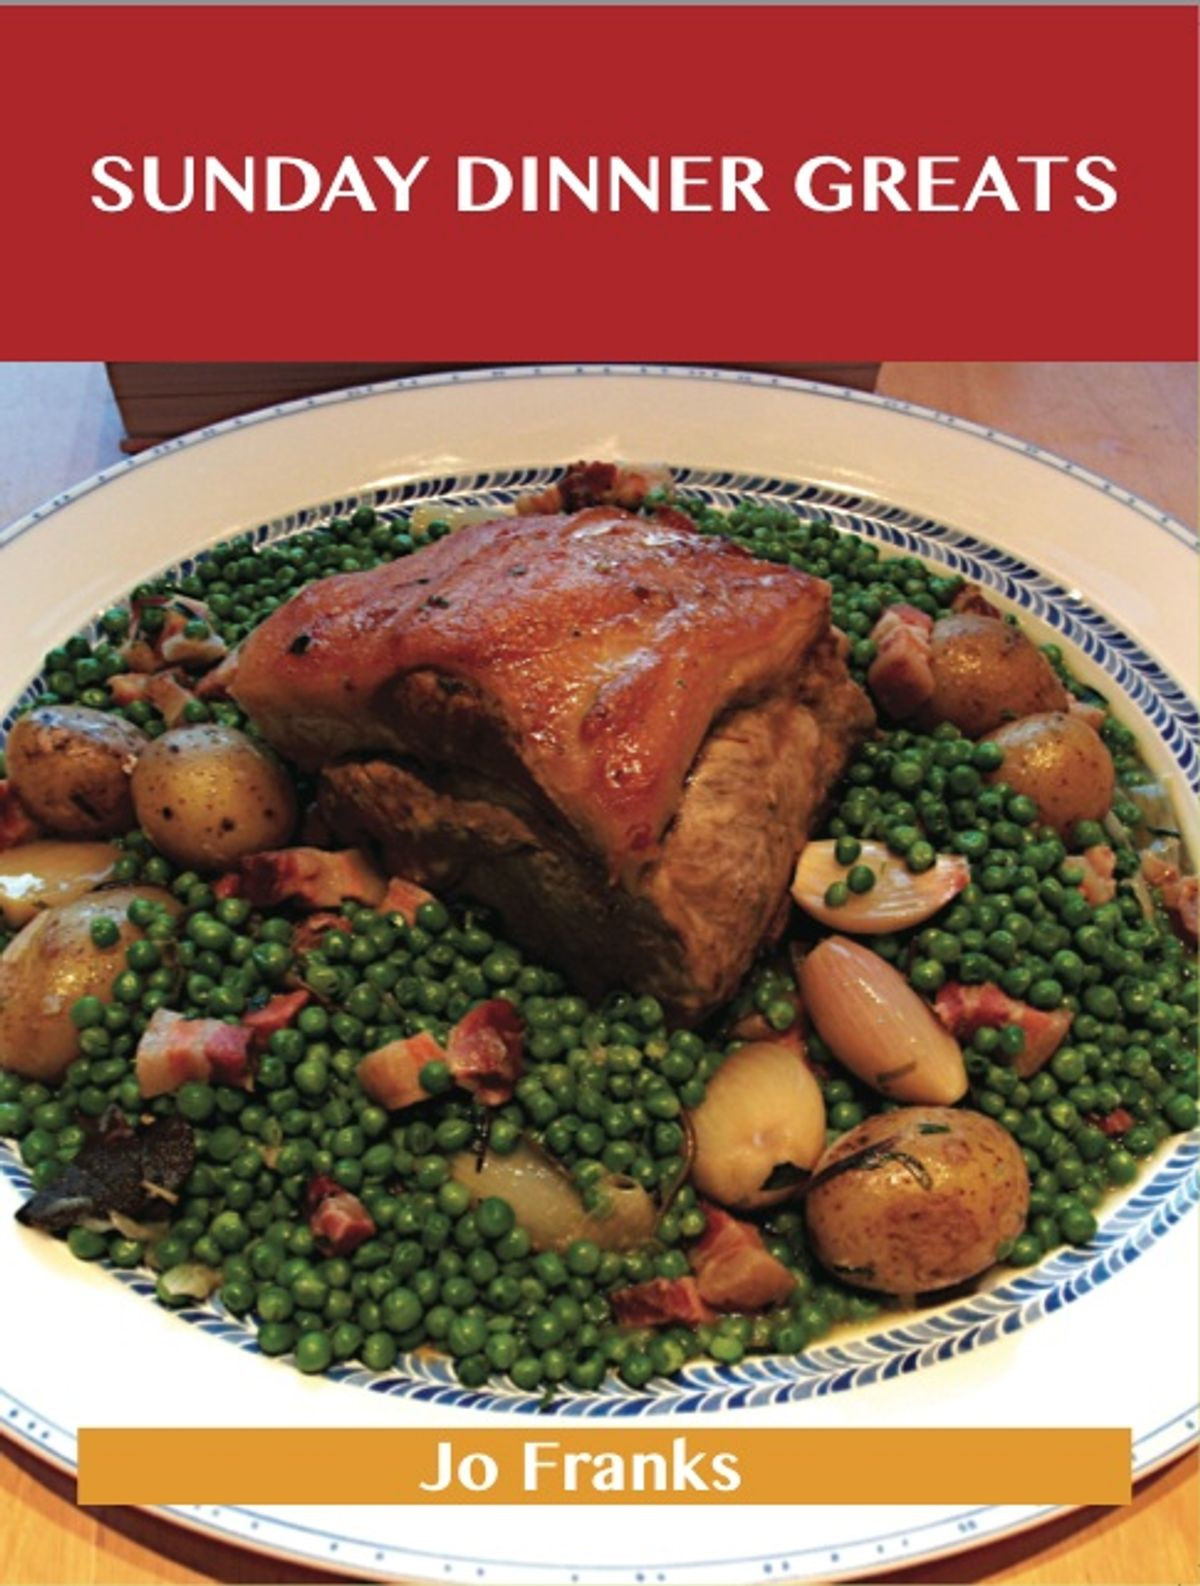 Weekend Dinner Ideas
 Sunday Dinner Greats Delicious Sunday Dinner Recipes The